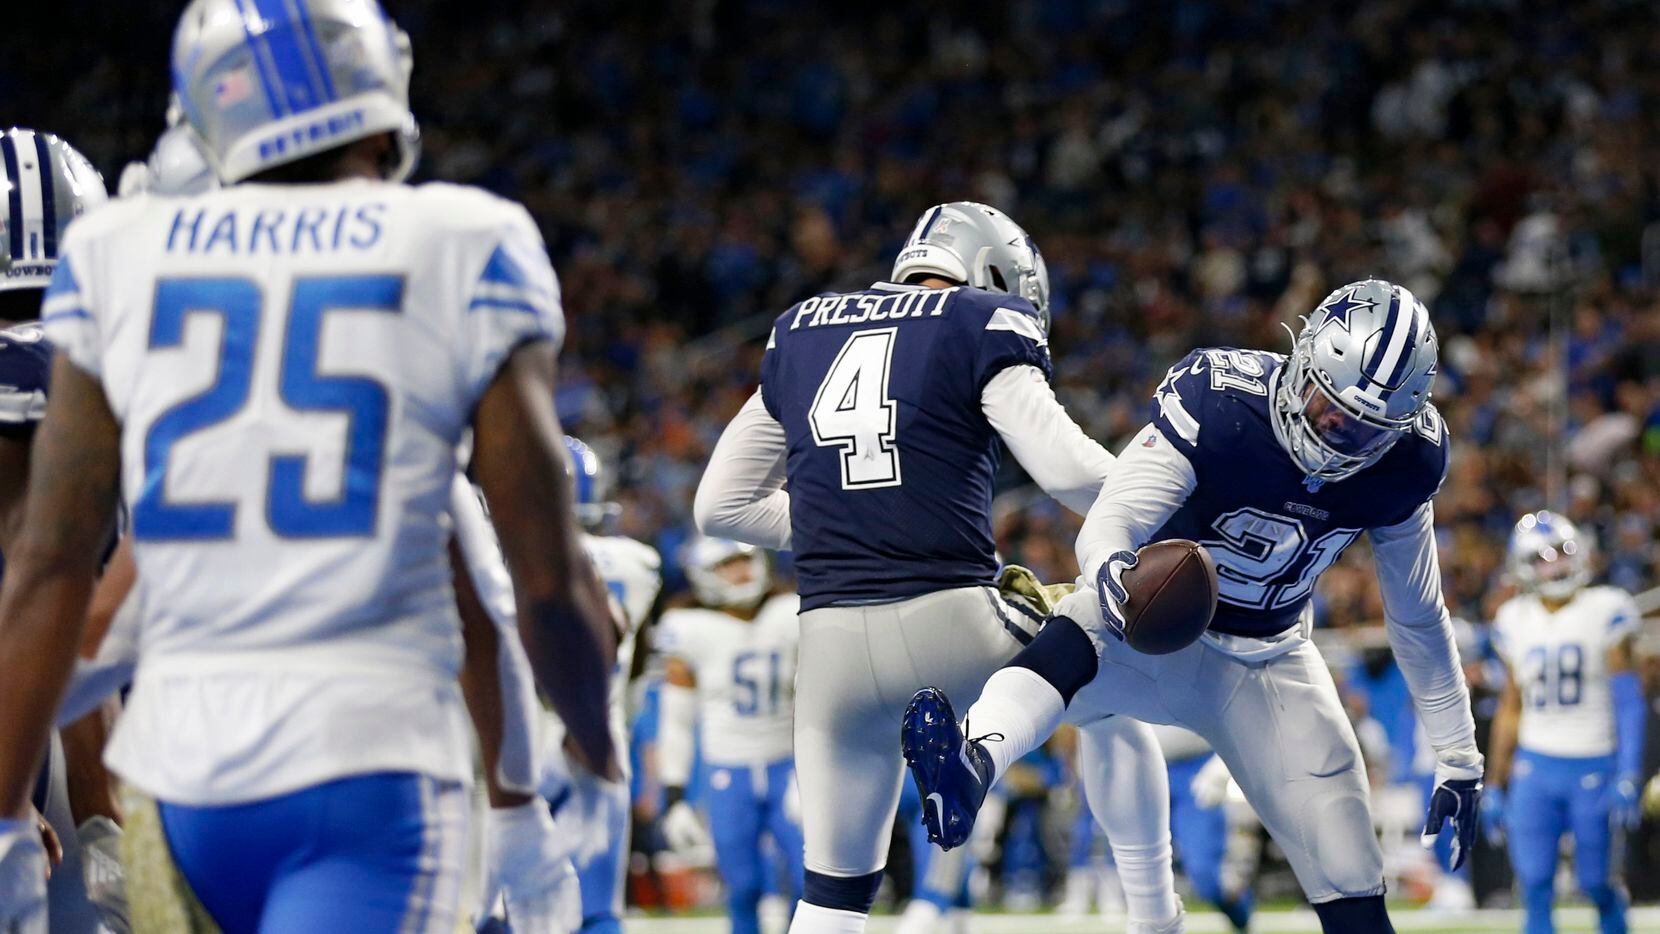 Dallas Cowboys running back Ezekiel Elliott (21) and Dallas Cowboys quarterback Dak Prescott (4) celebrate after Elliott scored a touchdown during the second half of play at Ford Field in Detroit, on Sunday, November 17, 2019. Dallas Cowboys defeated the Detroit Lions 35-27. (Vernon Bryant/The Dallas Morning News)